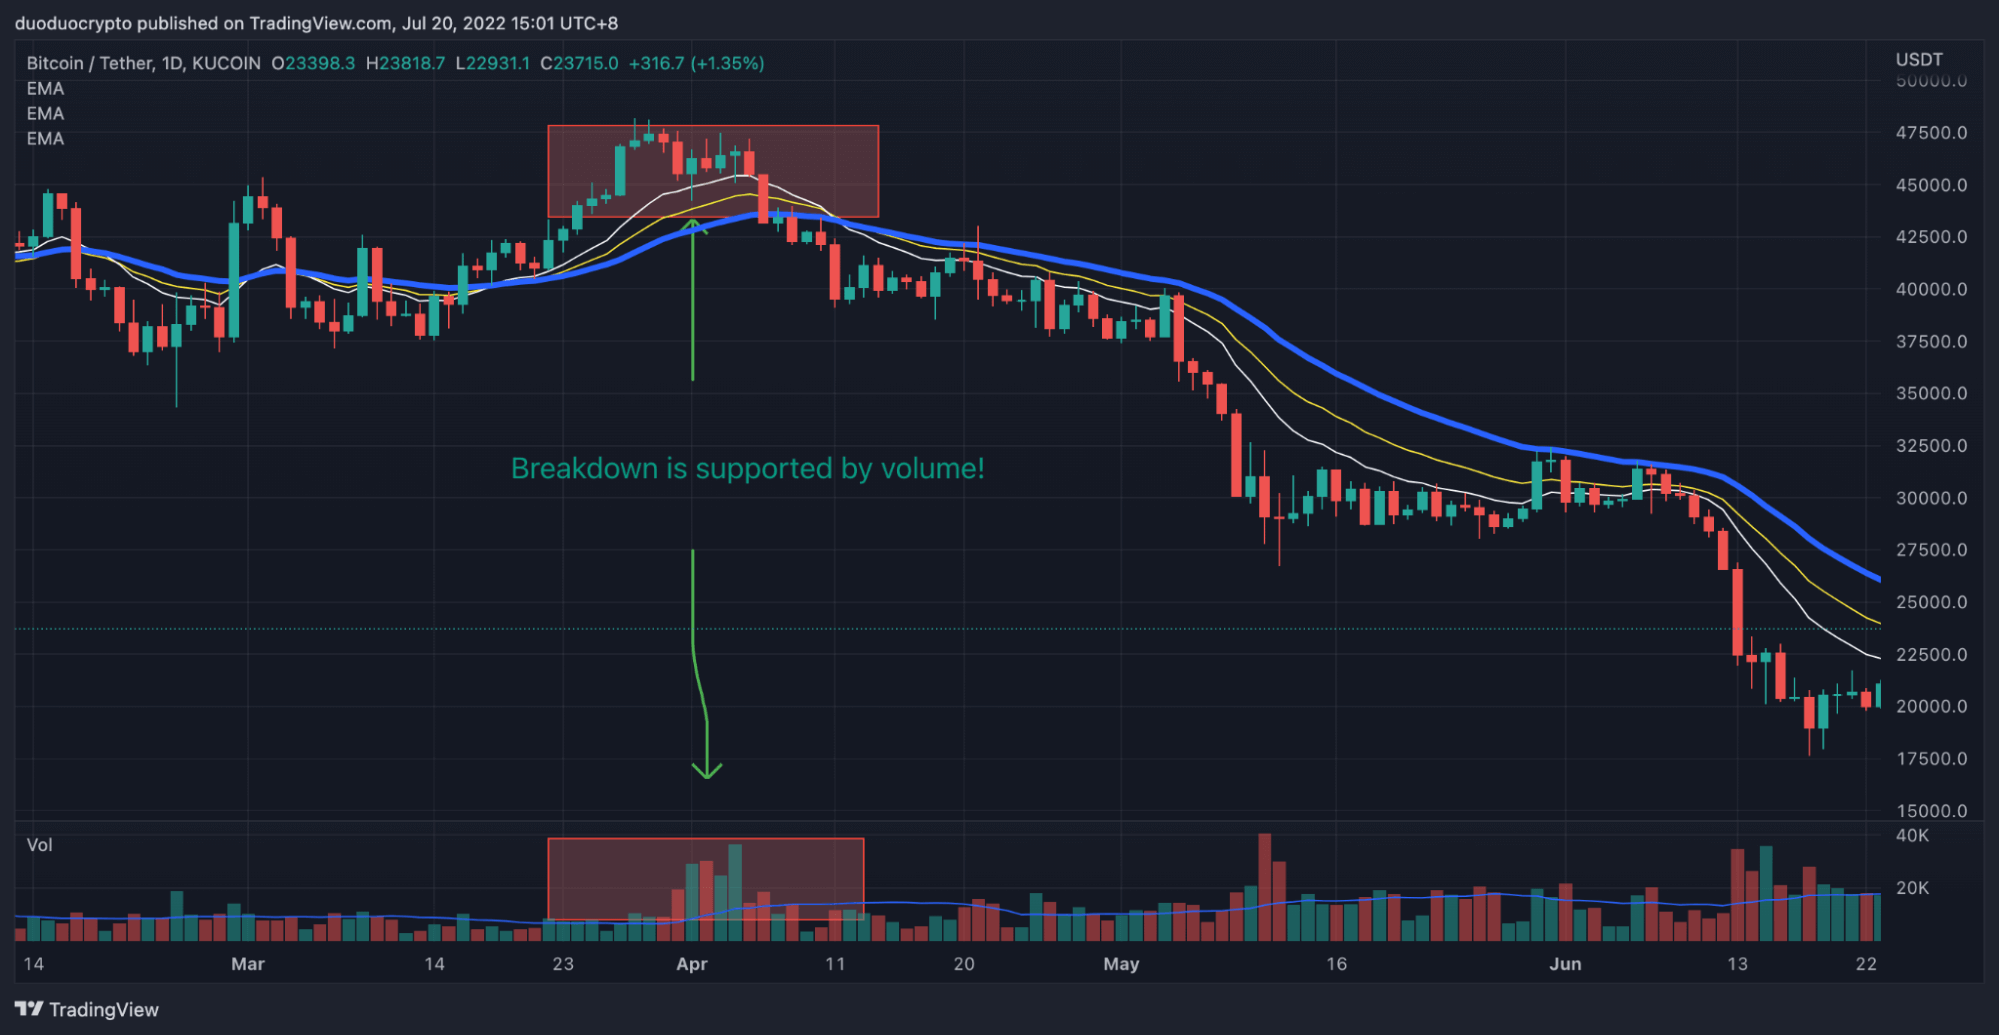 Breakout supported bt volume